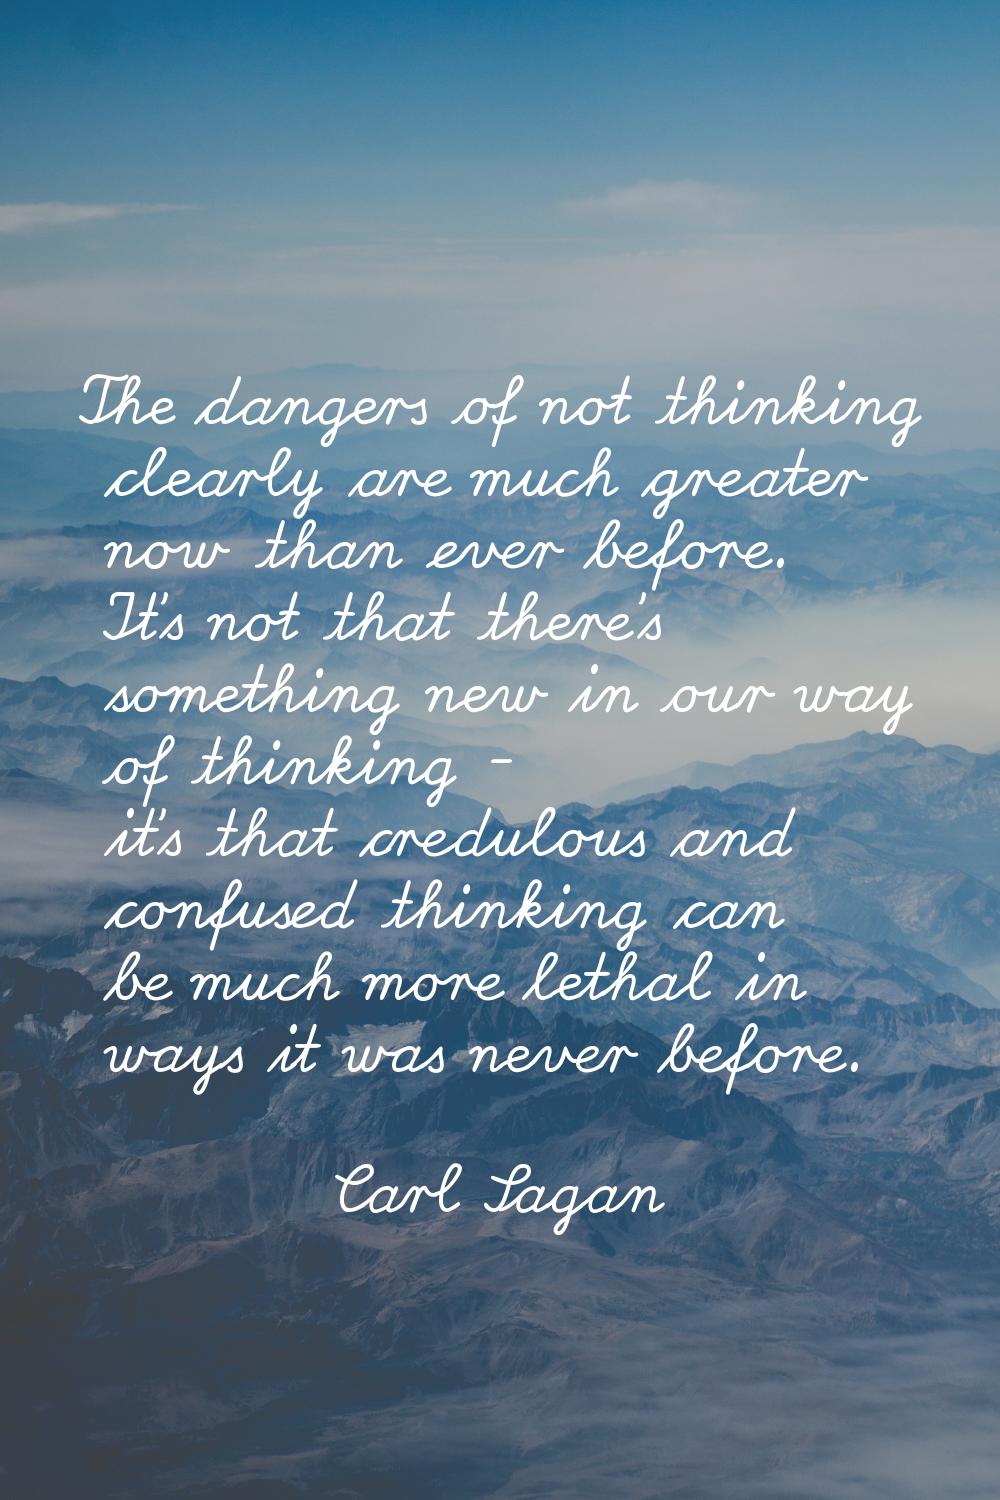 The dangers of not thinking clearly are much greater now than ever before. It's not that there's so